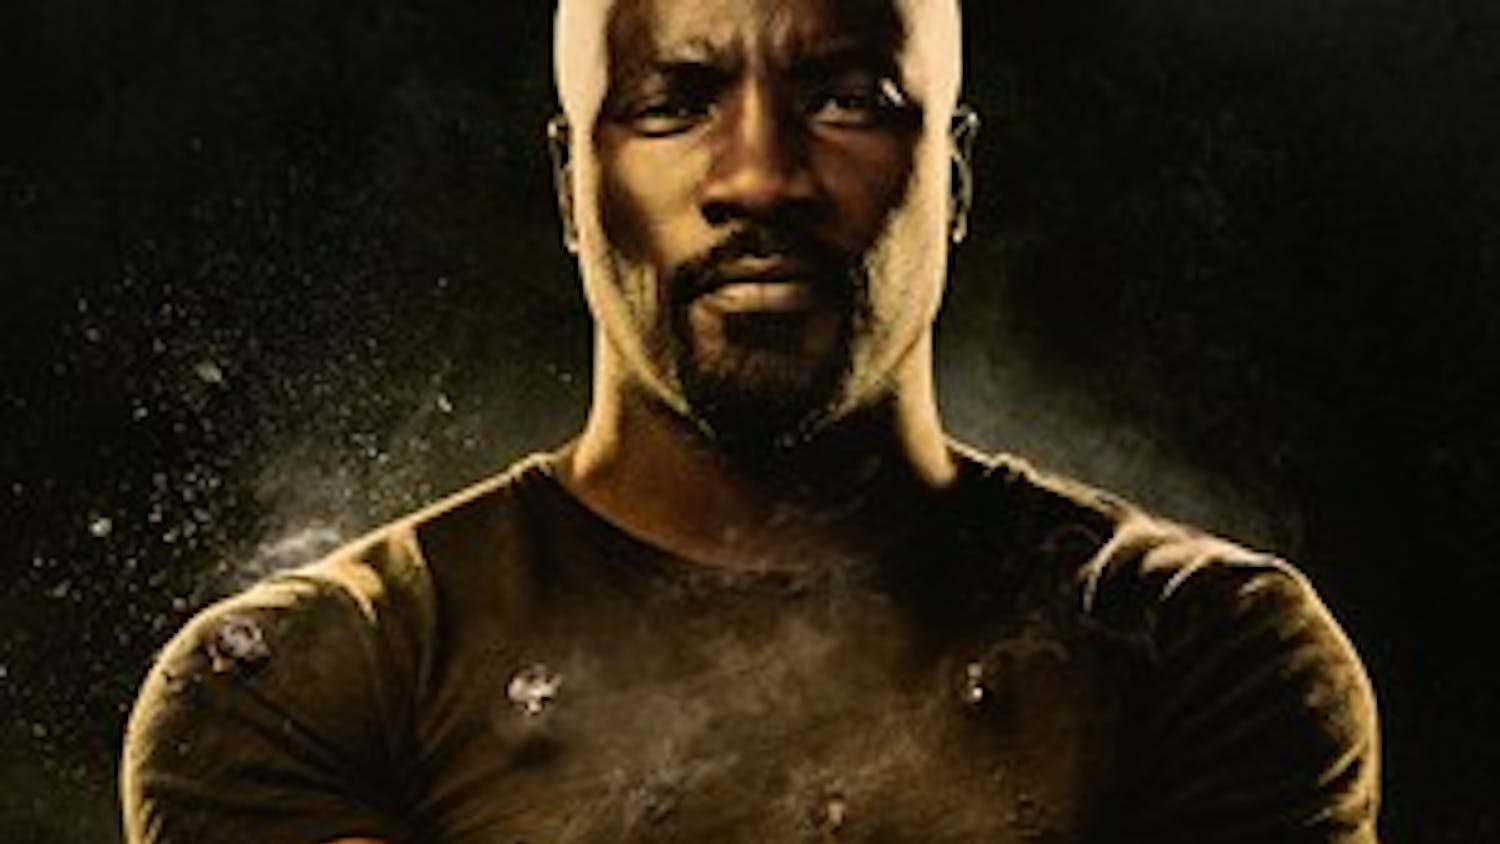 Netflix's new original series 'Luke Cage' delivers an intense superhero story while referencing cultural matters and pertaining to&nbsp;historical significance.&nbsp;